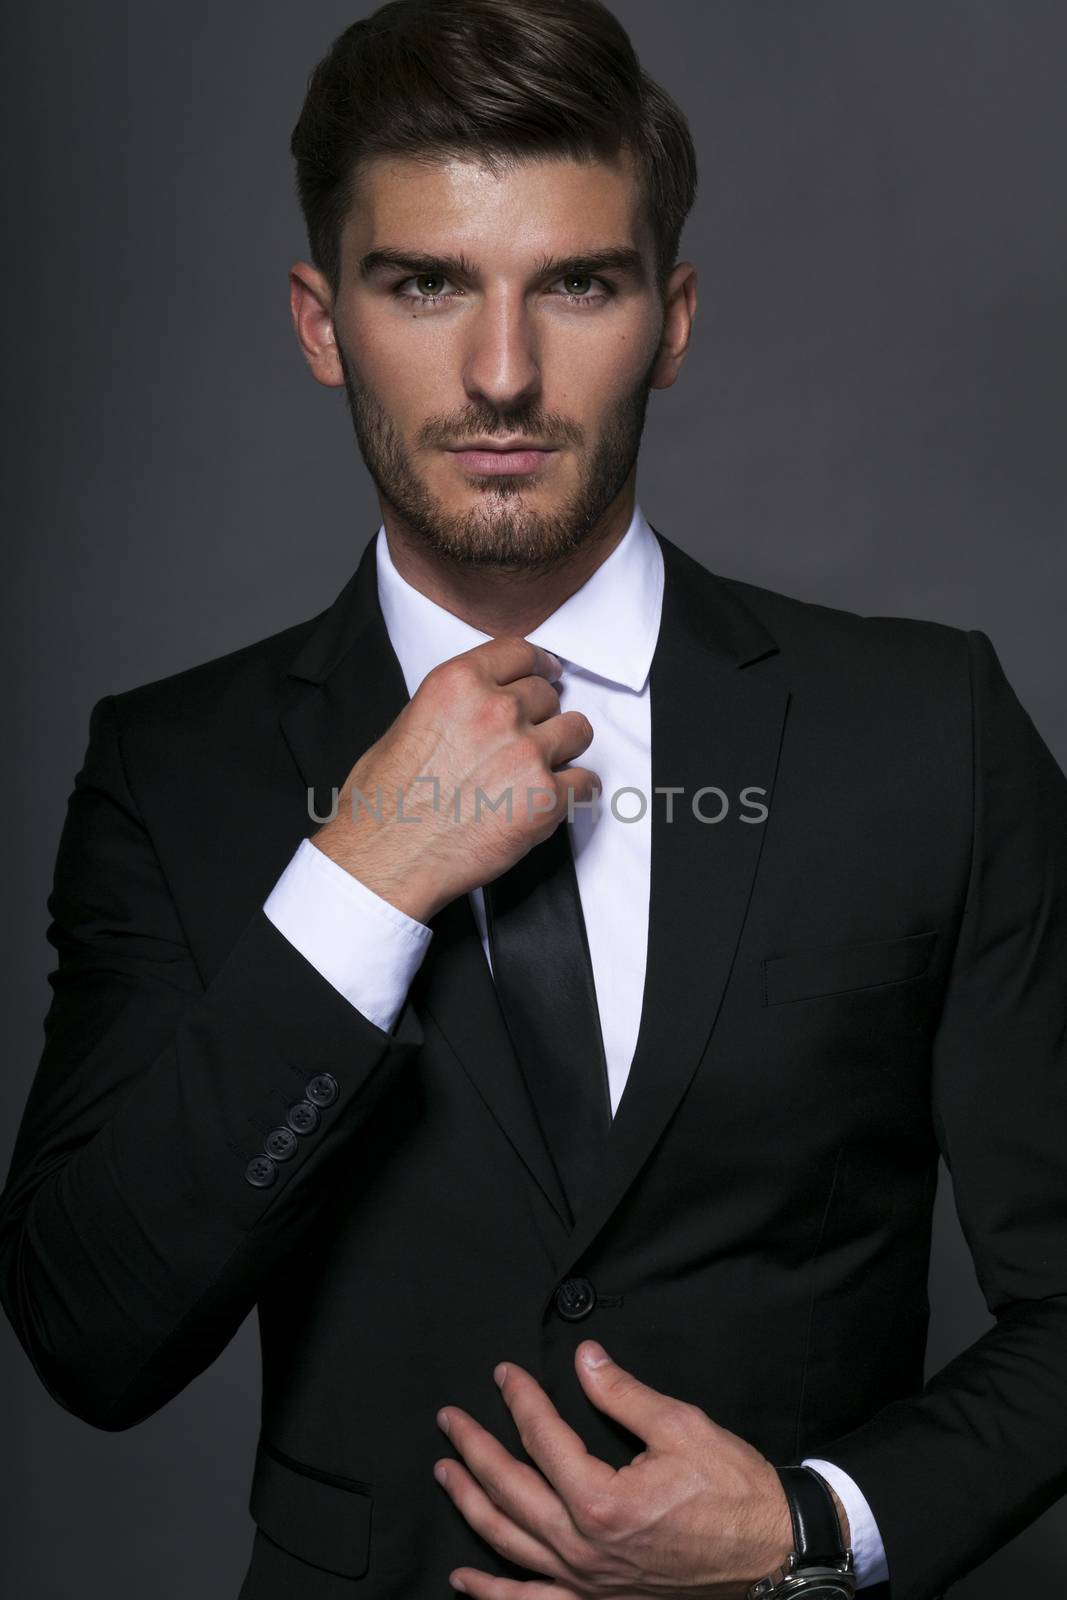 Handsome bearded young businessman in a stylish suit adjusting his tie with a serious thoughtful expression